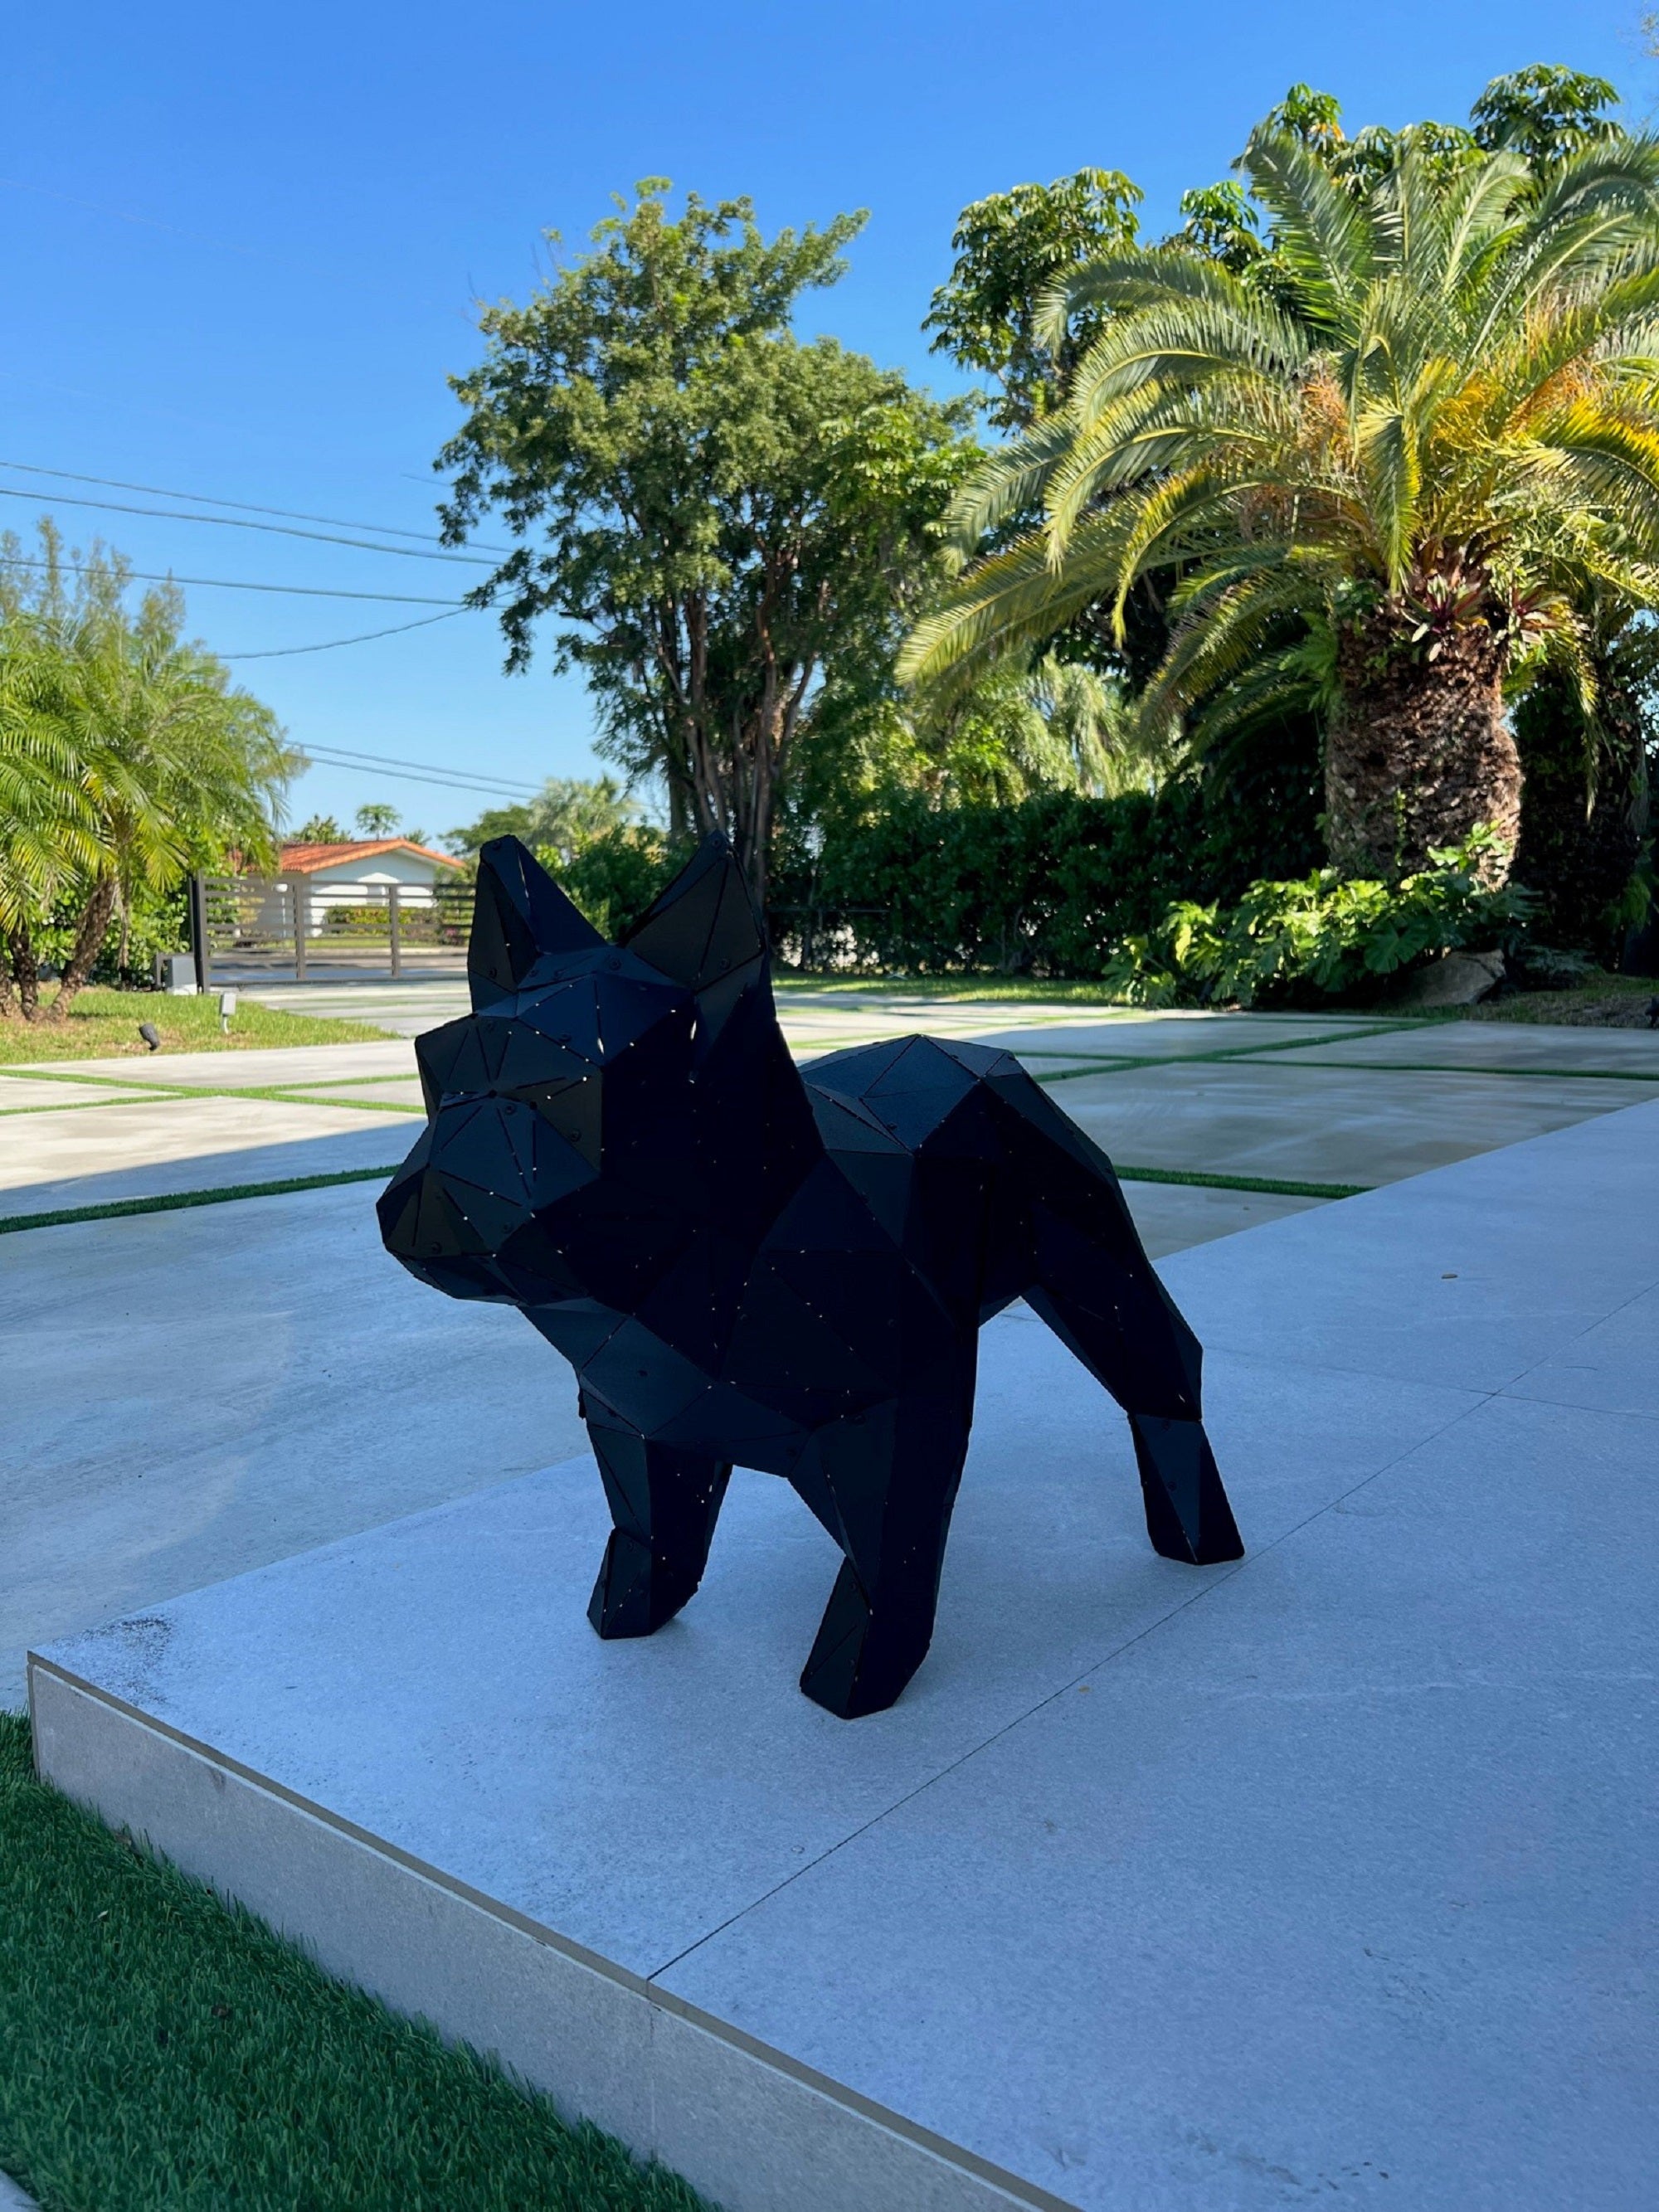 3D Metal Sculpture of Dog Breed French Bulldog